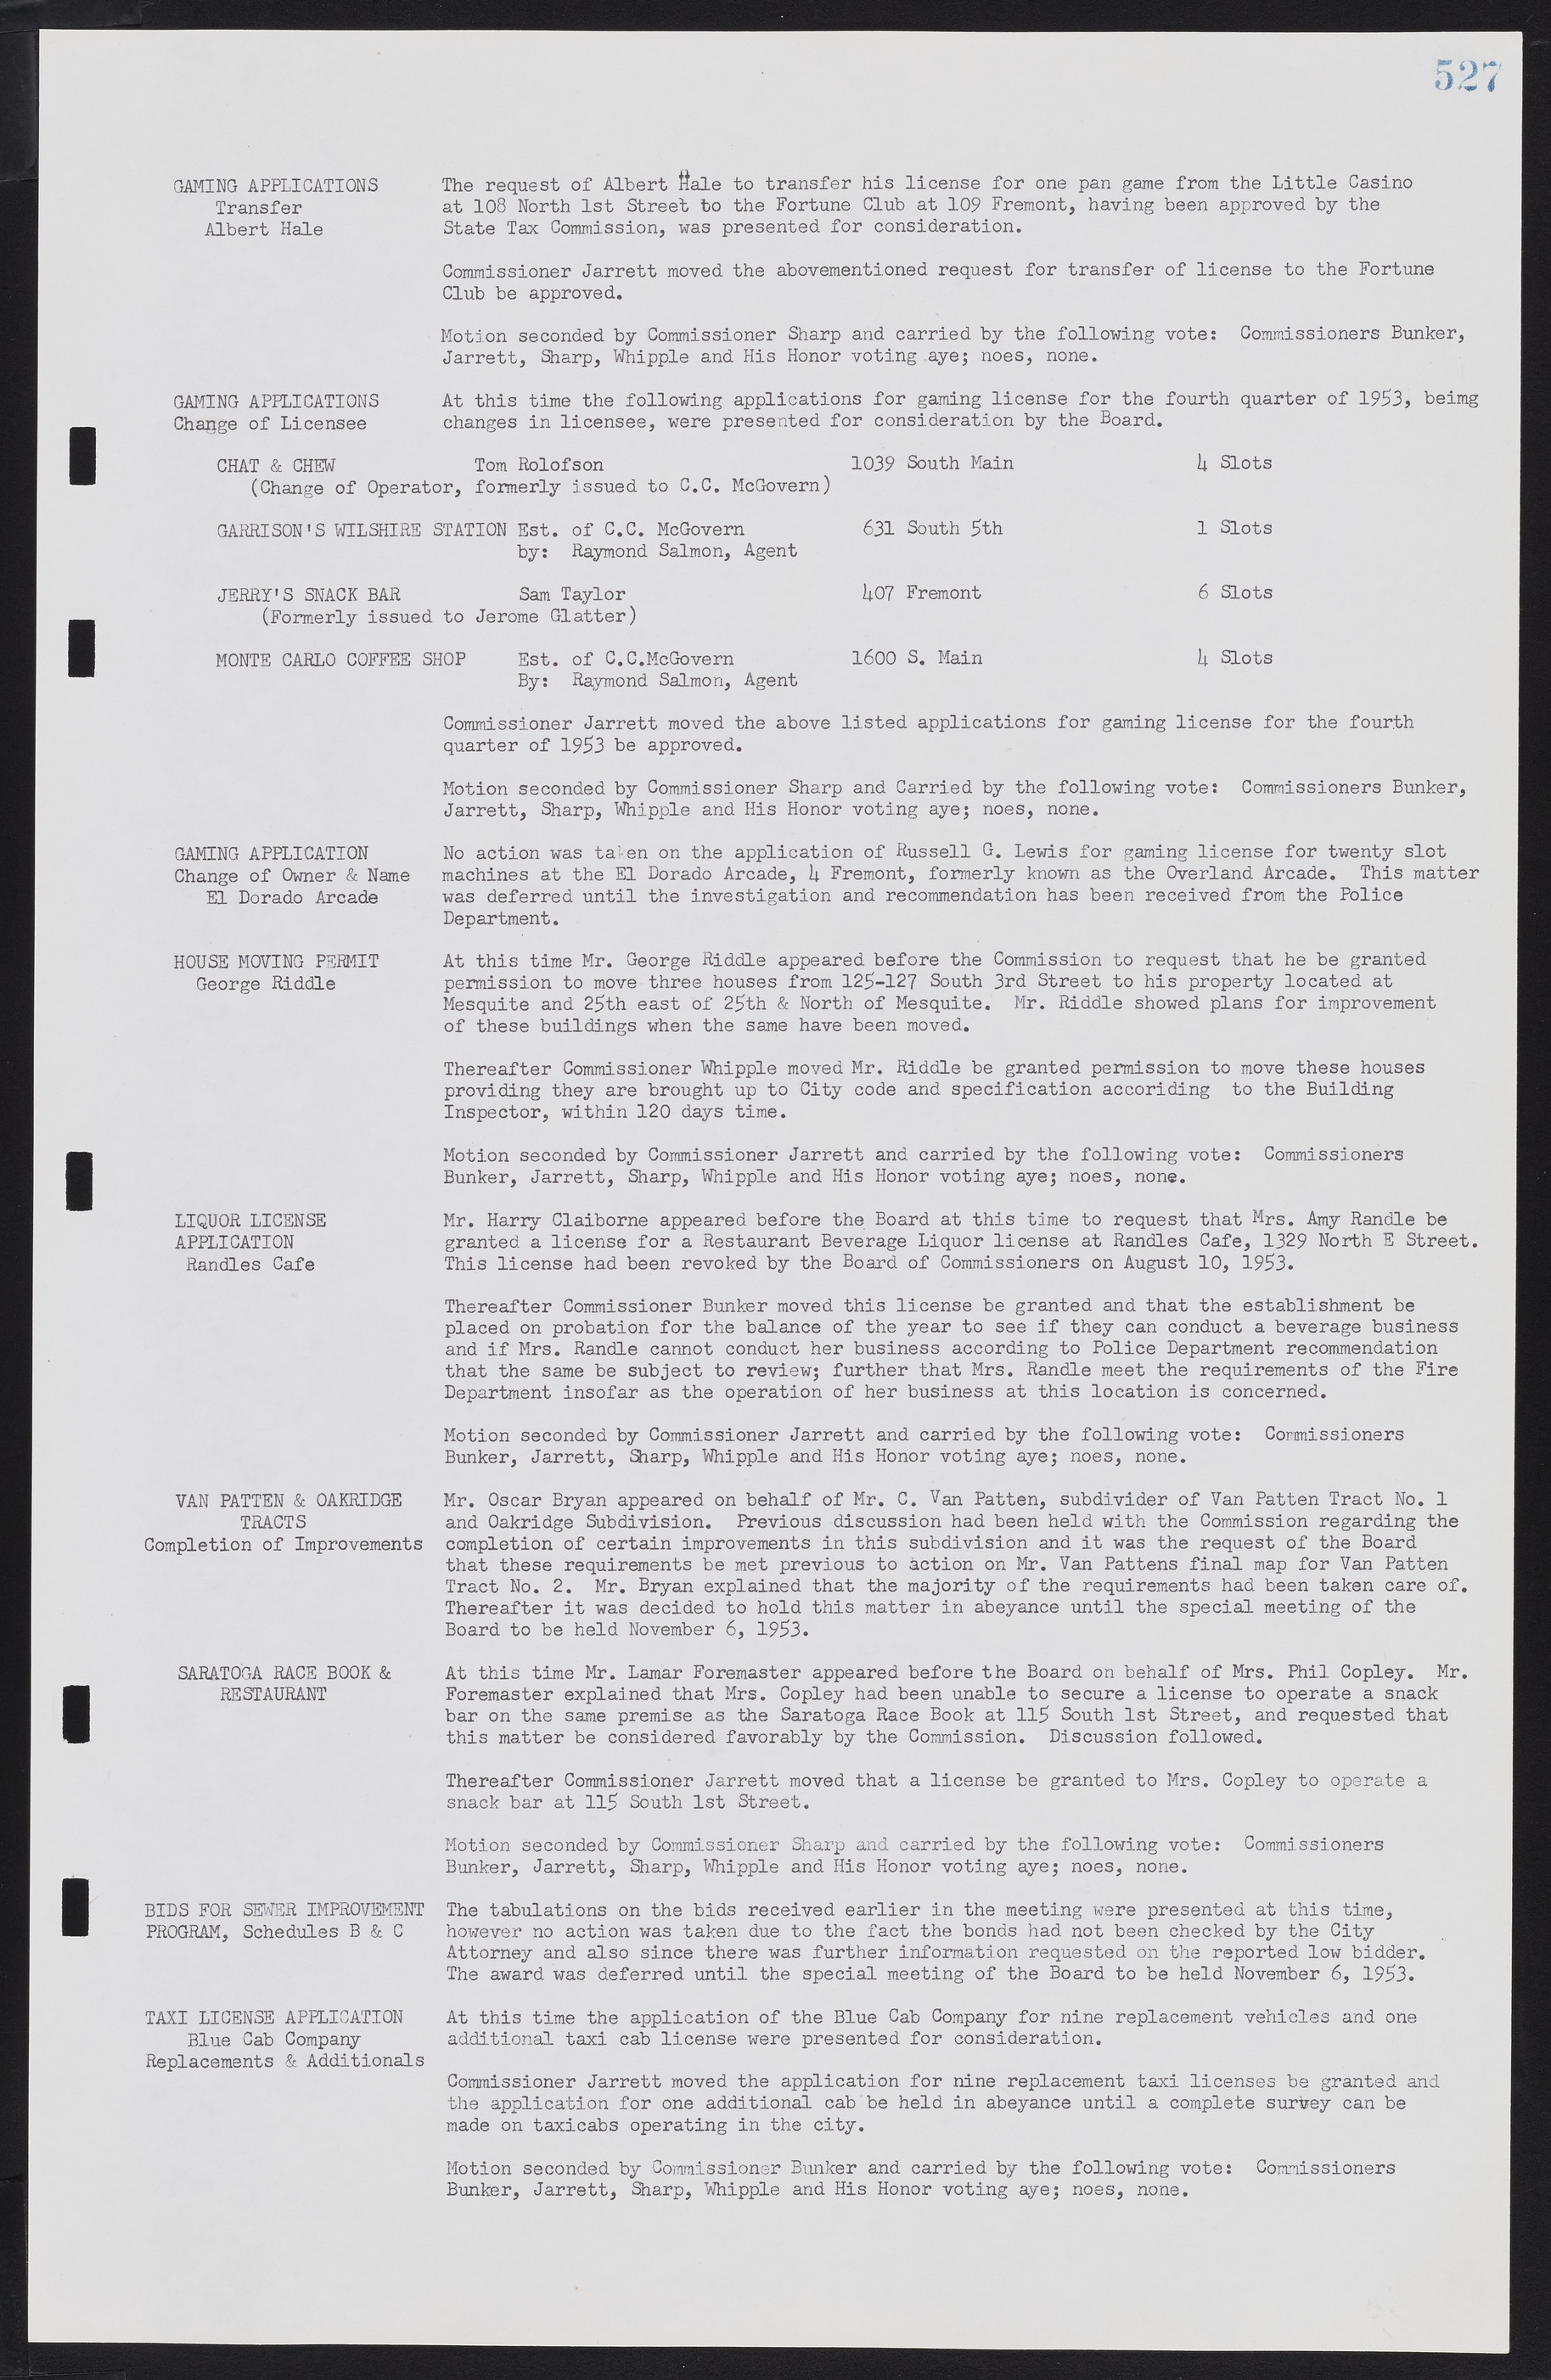 Las Vegas City Commission Minutes, May 26, 1952 to February 17, 1954, lvc000008-557